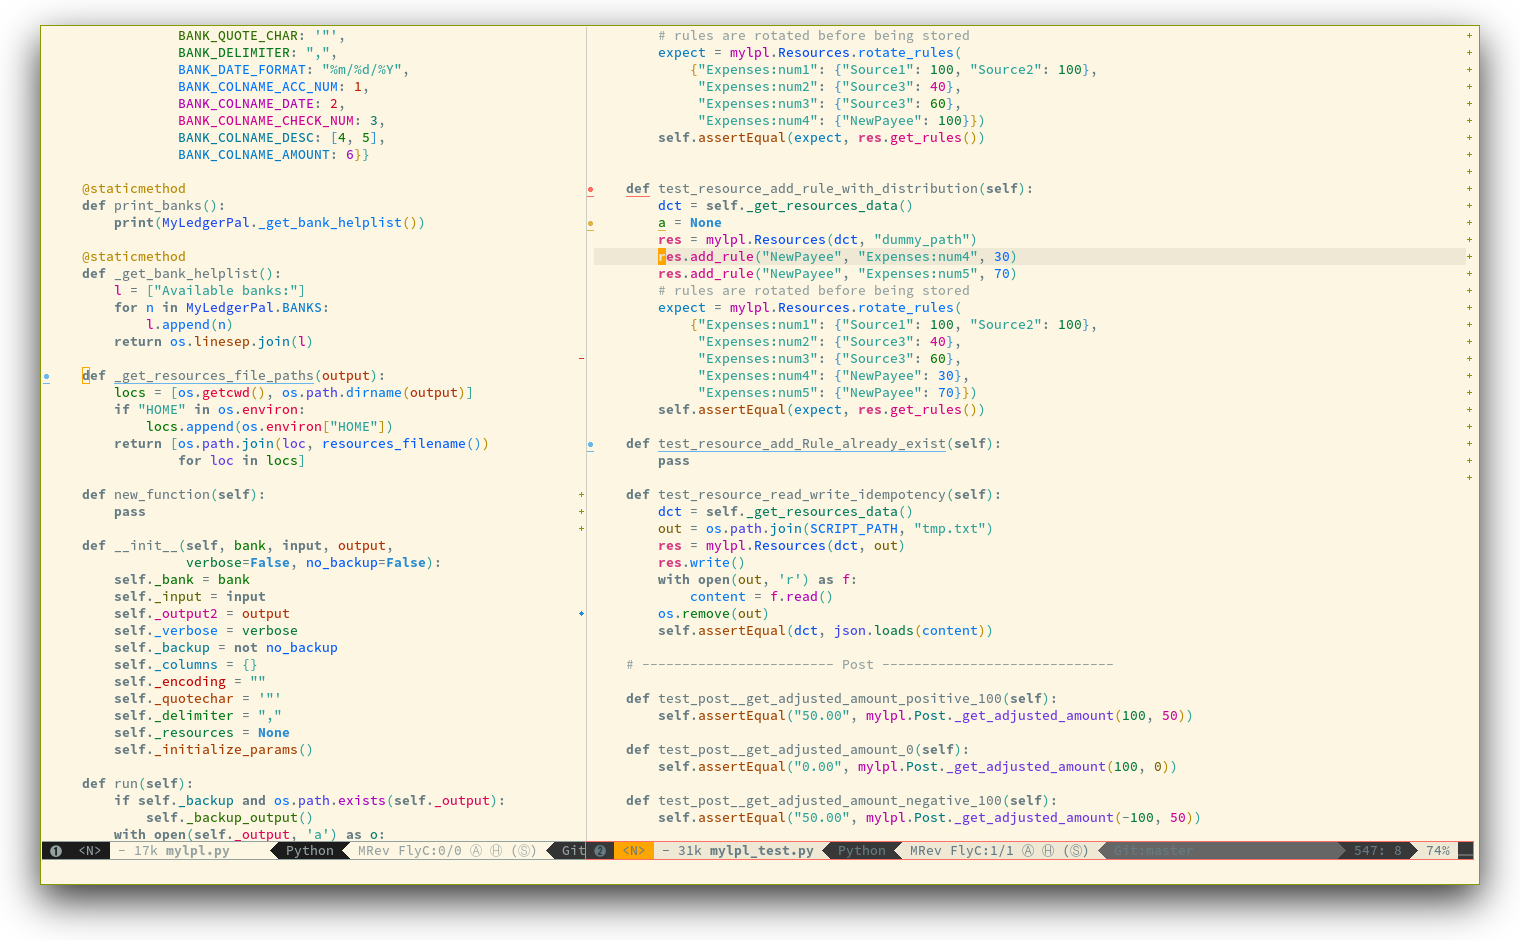 /TakeV/spacemacs/media/commit/79d74fc4c06ceeac7cd2c519df0657a5206ef789/layers/+themes/colors/img/theme-tweaks-python.png